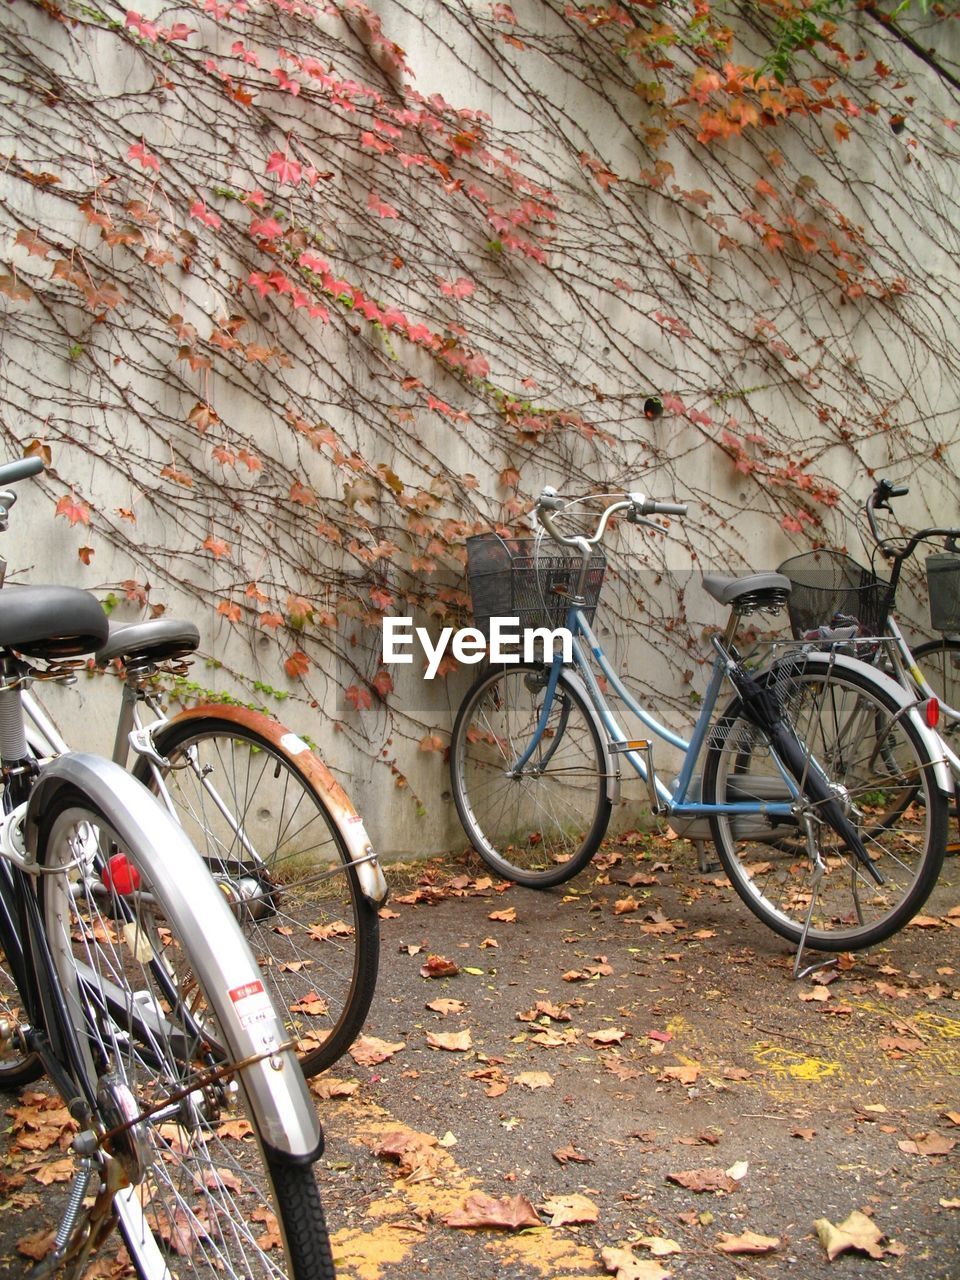 BICYCLES PARKED ON BICYCLE